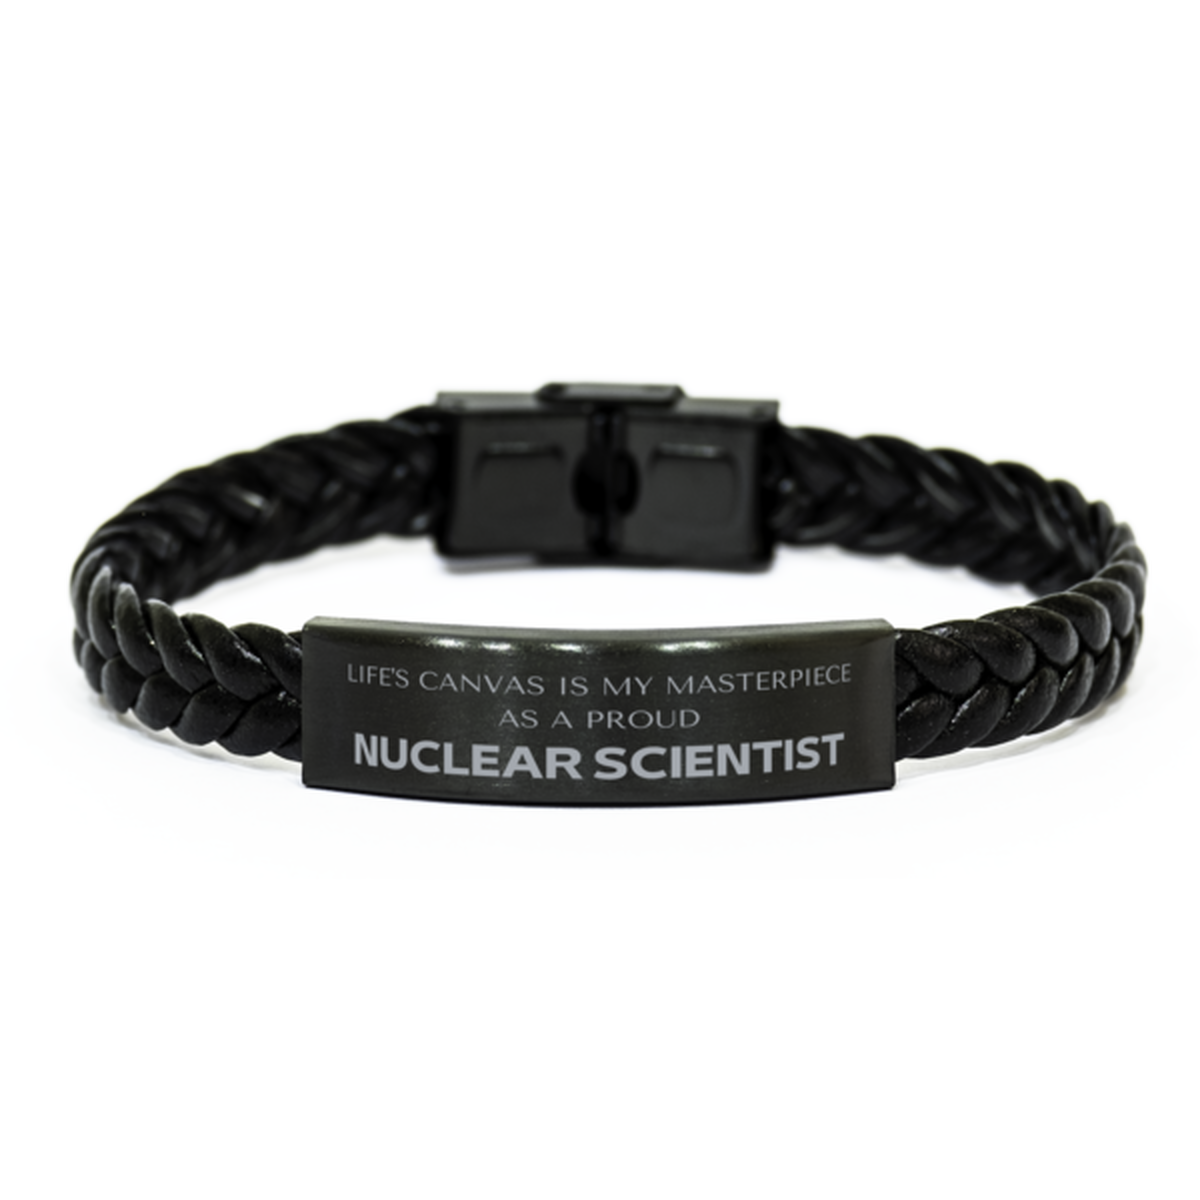 Proud Nuclear Scientist Gifts, Life's canvas is my masterpiece, Epic Birthday Christmas Unique Braided Leather Bracelet For Nuclear Scientist, Coworkers, Men, Women, Friends